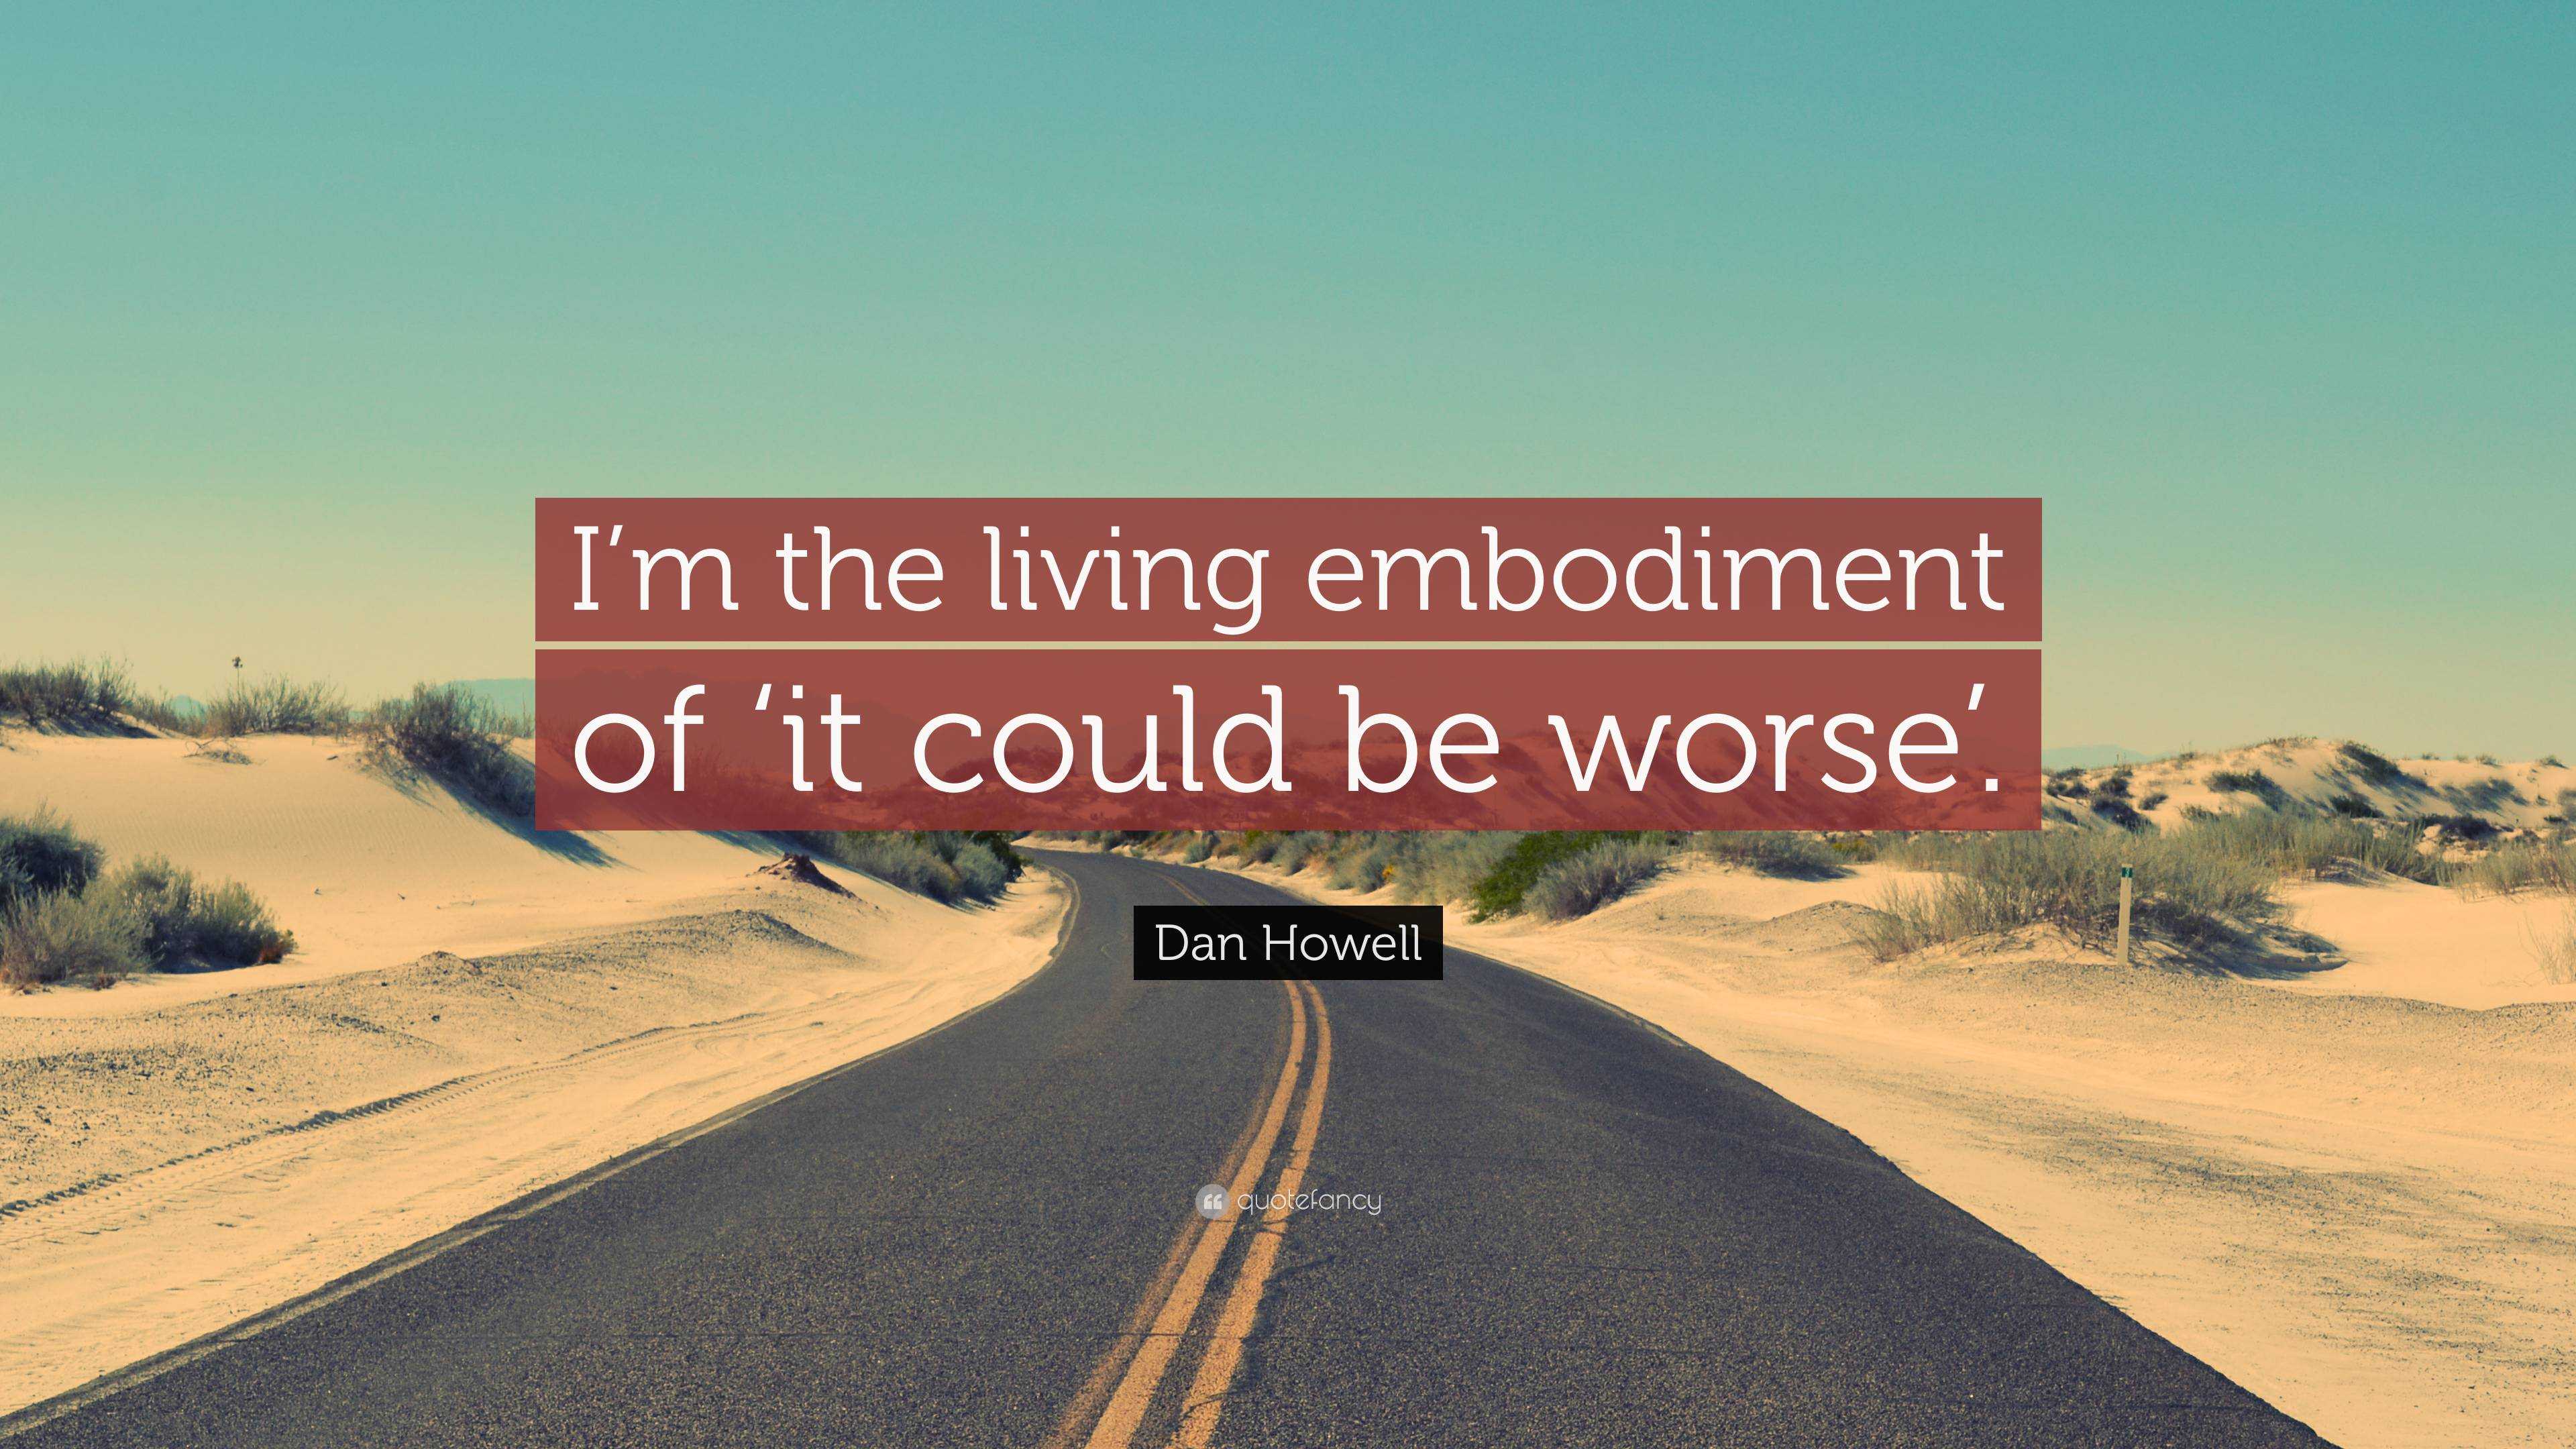 Dan Howell Quote: “I’m the living embodiment of ‘it could be worse’.”